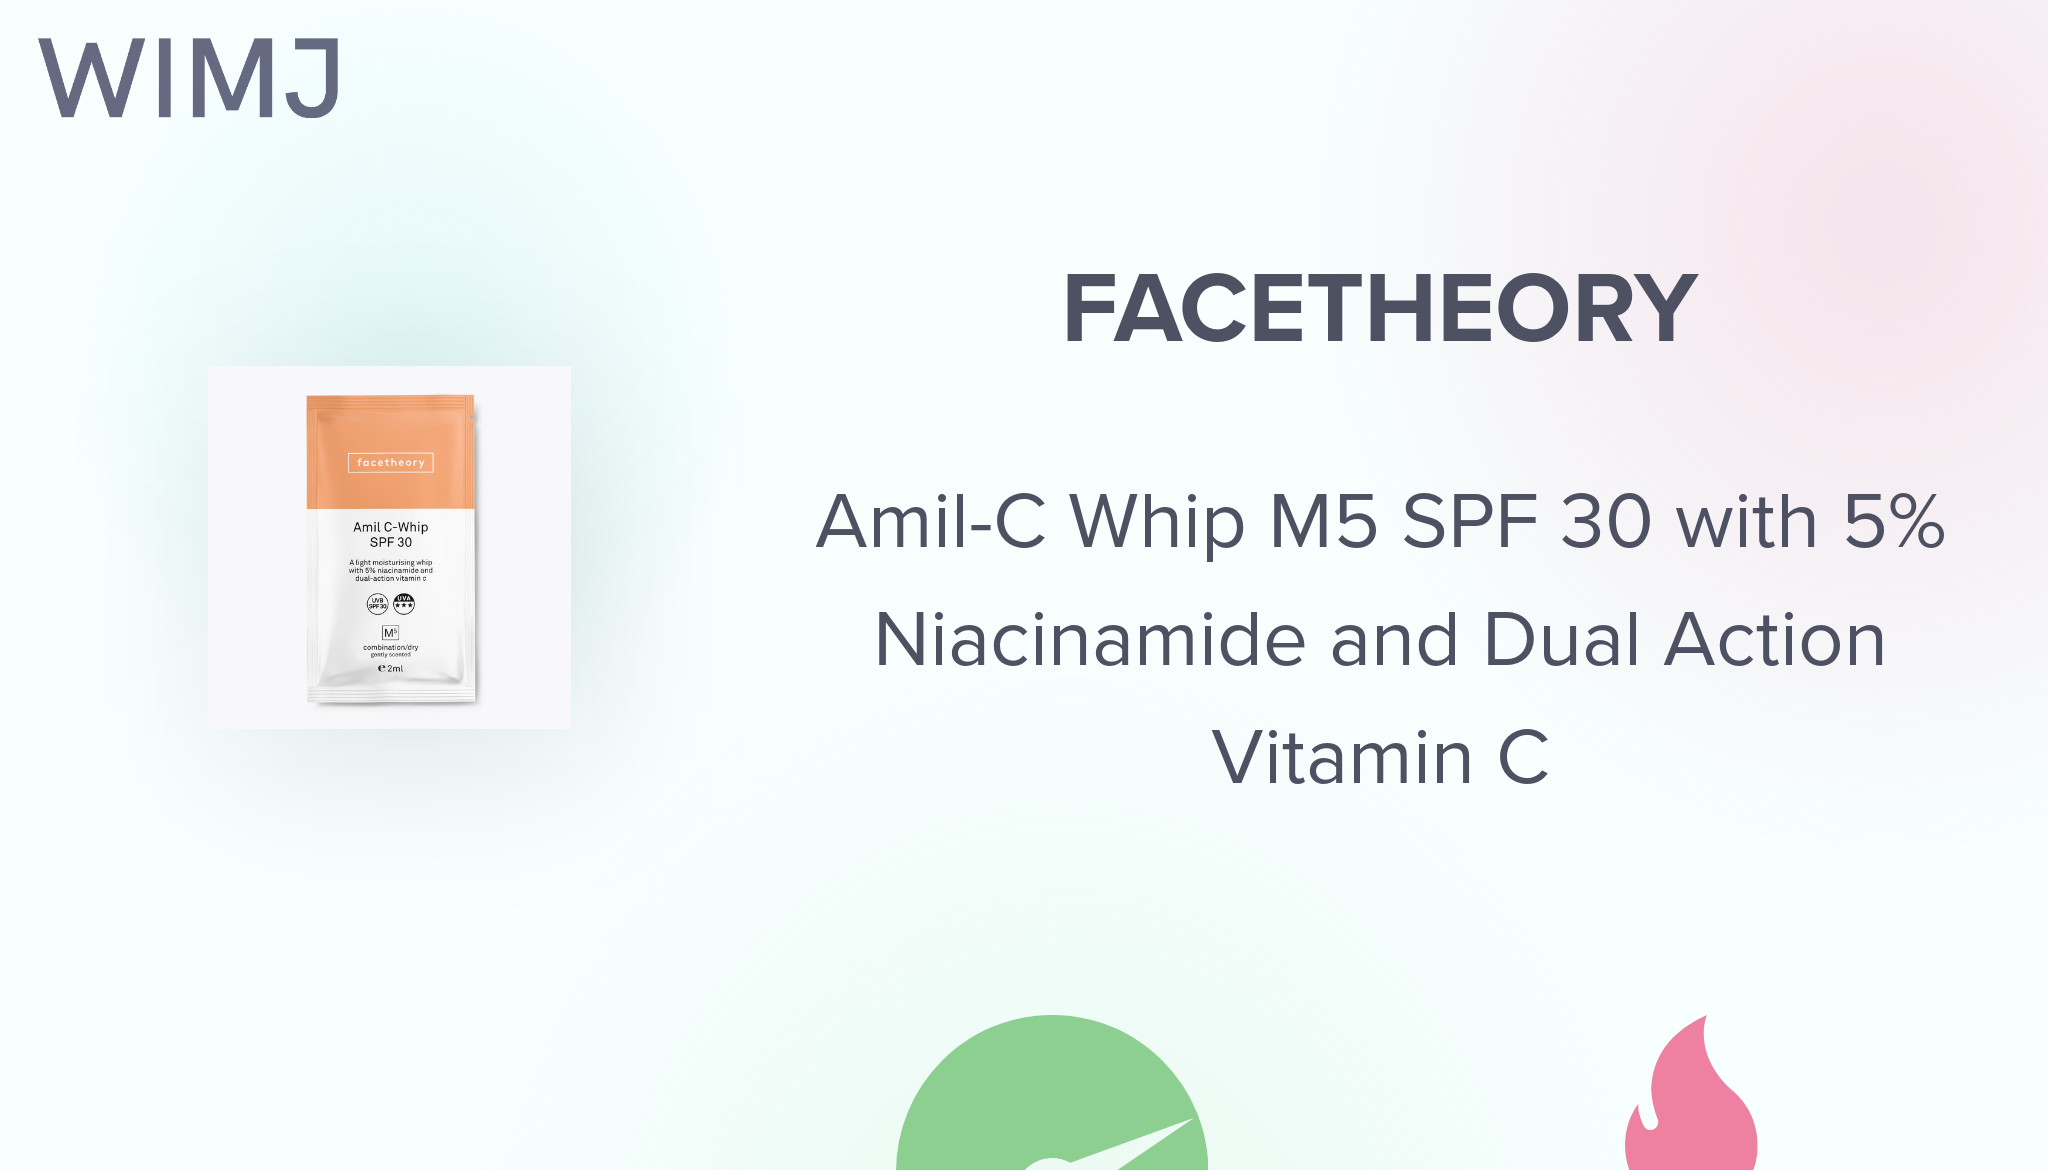 Amil-C Whip M5 SPF 30 with 5% Niacinamide and Dual Action Vitamin